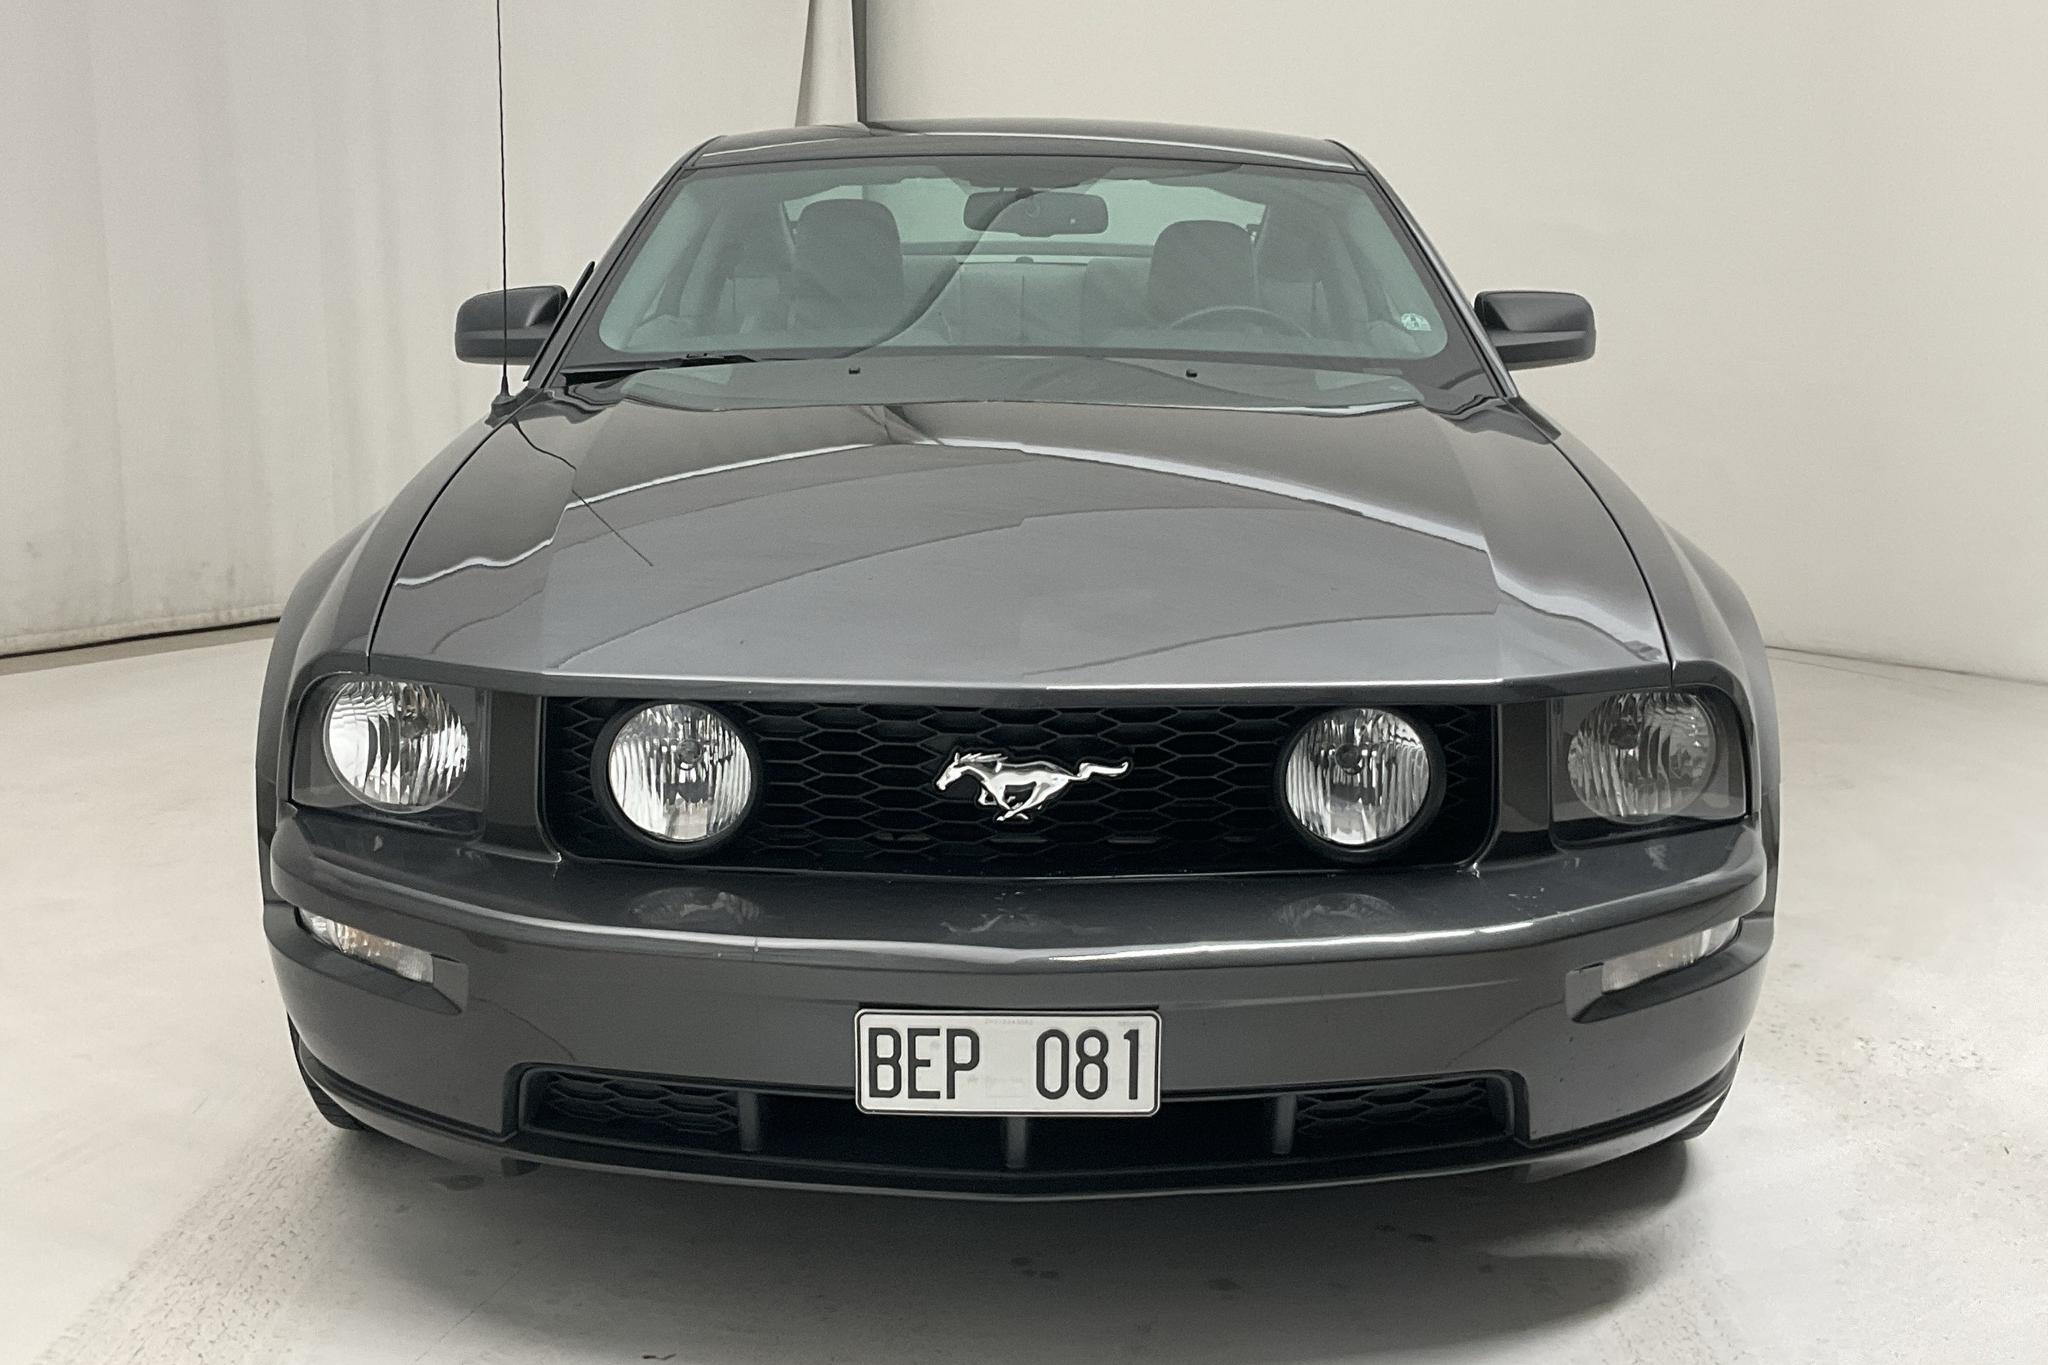 Ford Mustang GT 4.6 V8 Coupé (300hk) - 97 880 km - Automatic - Dark Grey - 2007